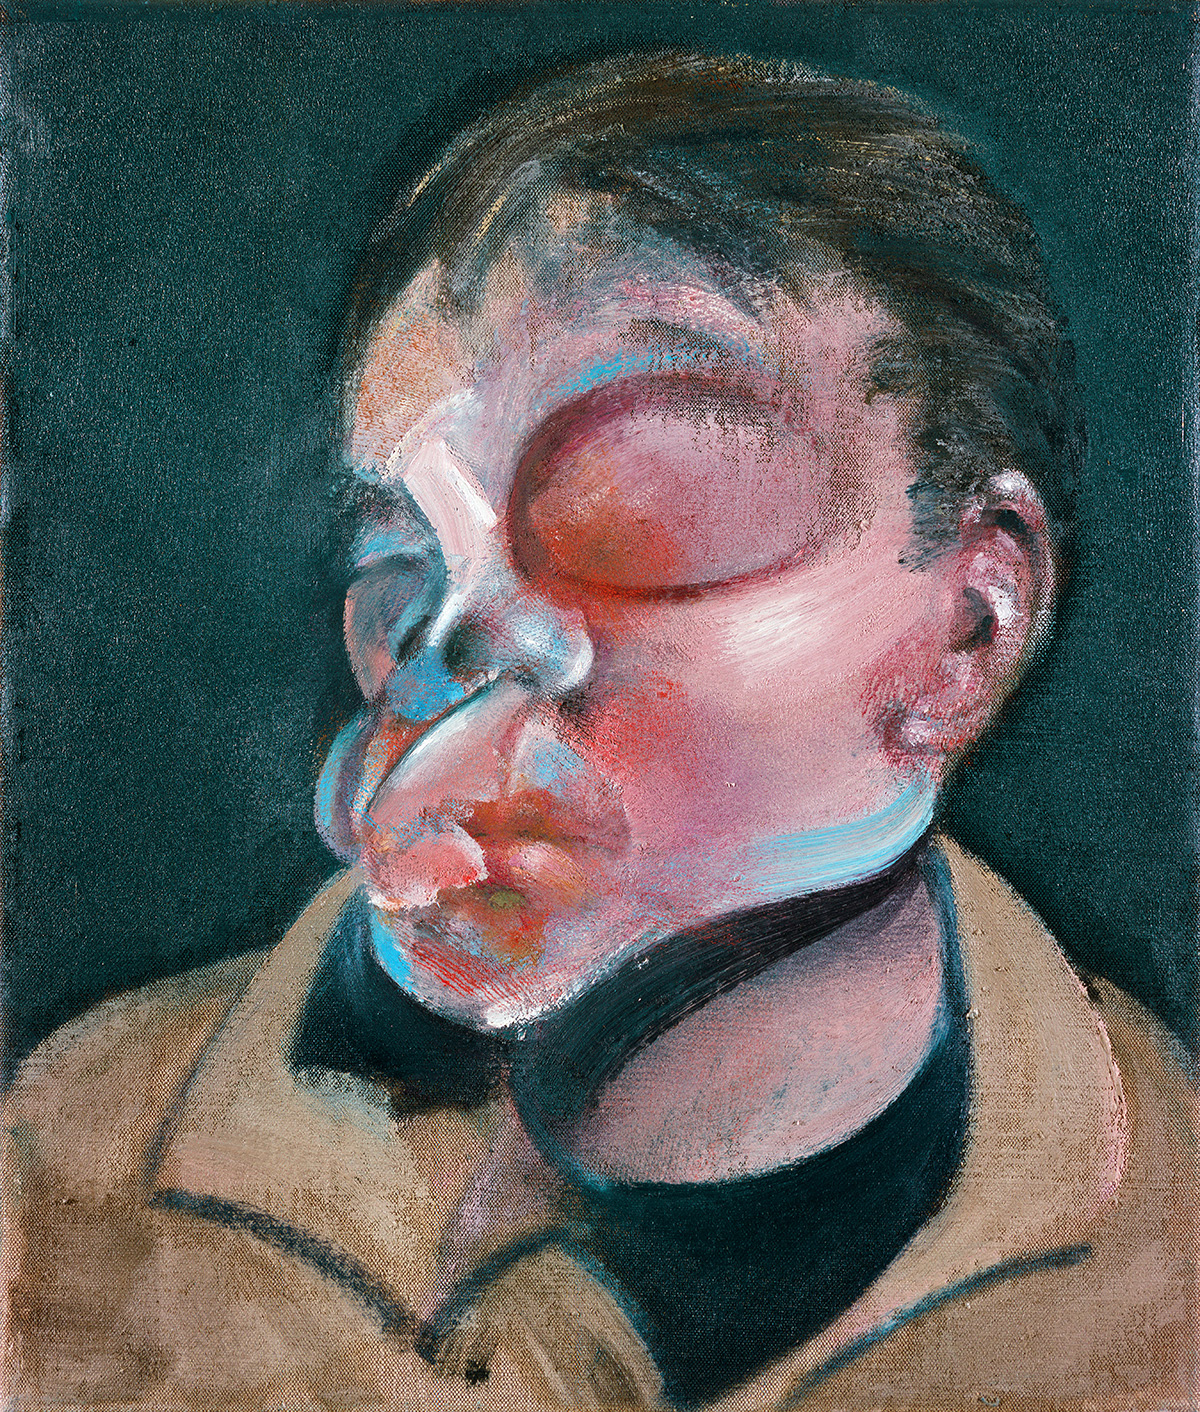 Self-Portrait with Injured Eye, 1972. Oil on canvas. CR no. 72-02. © The Estate of Francis Bacon / DACS London 2023. All rights reserved.